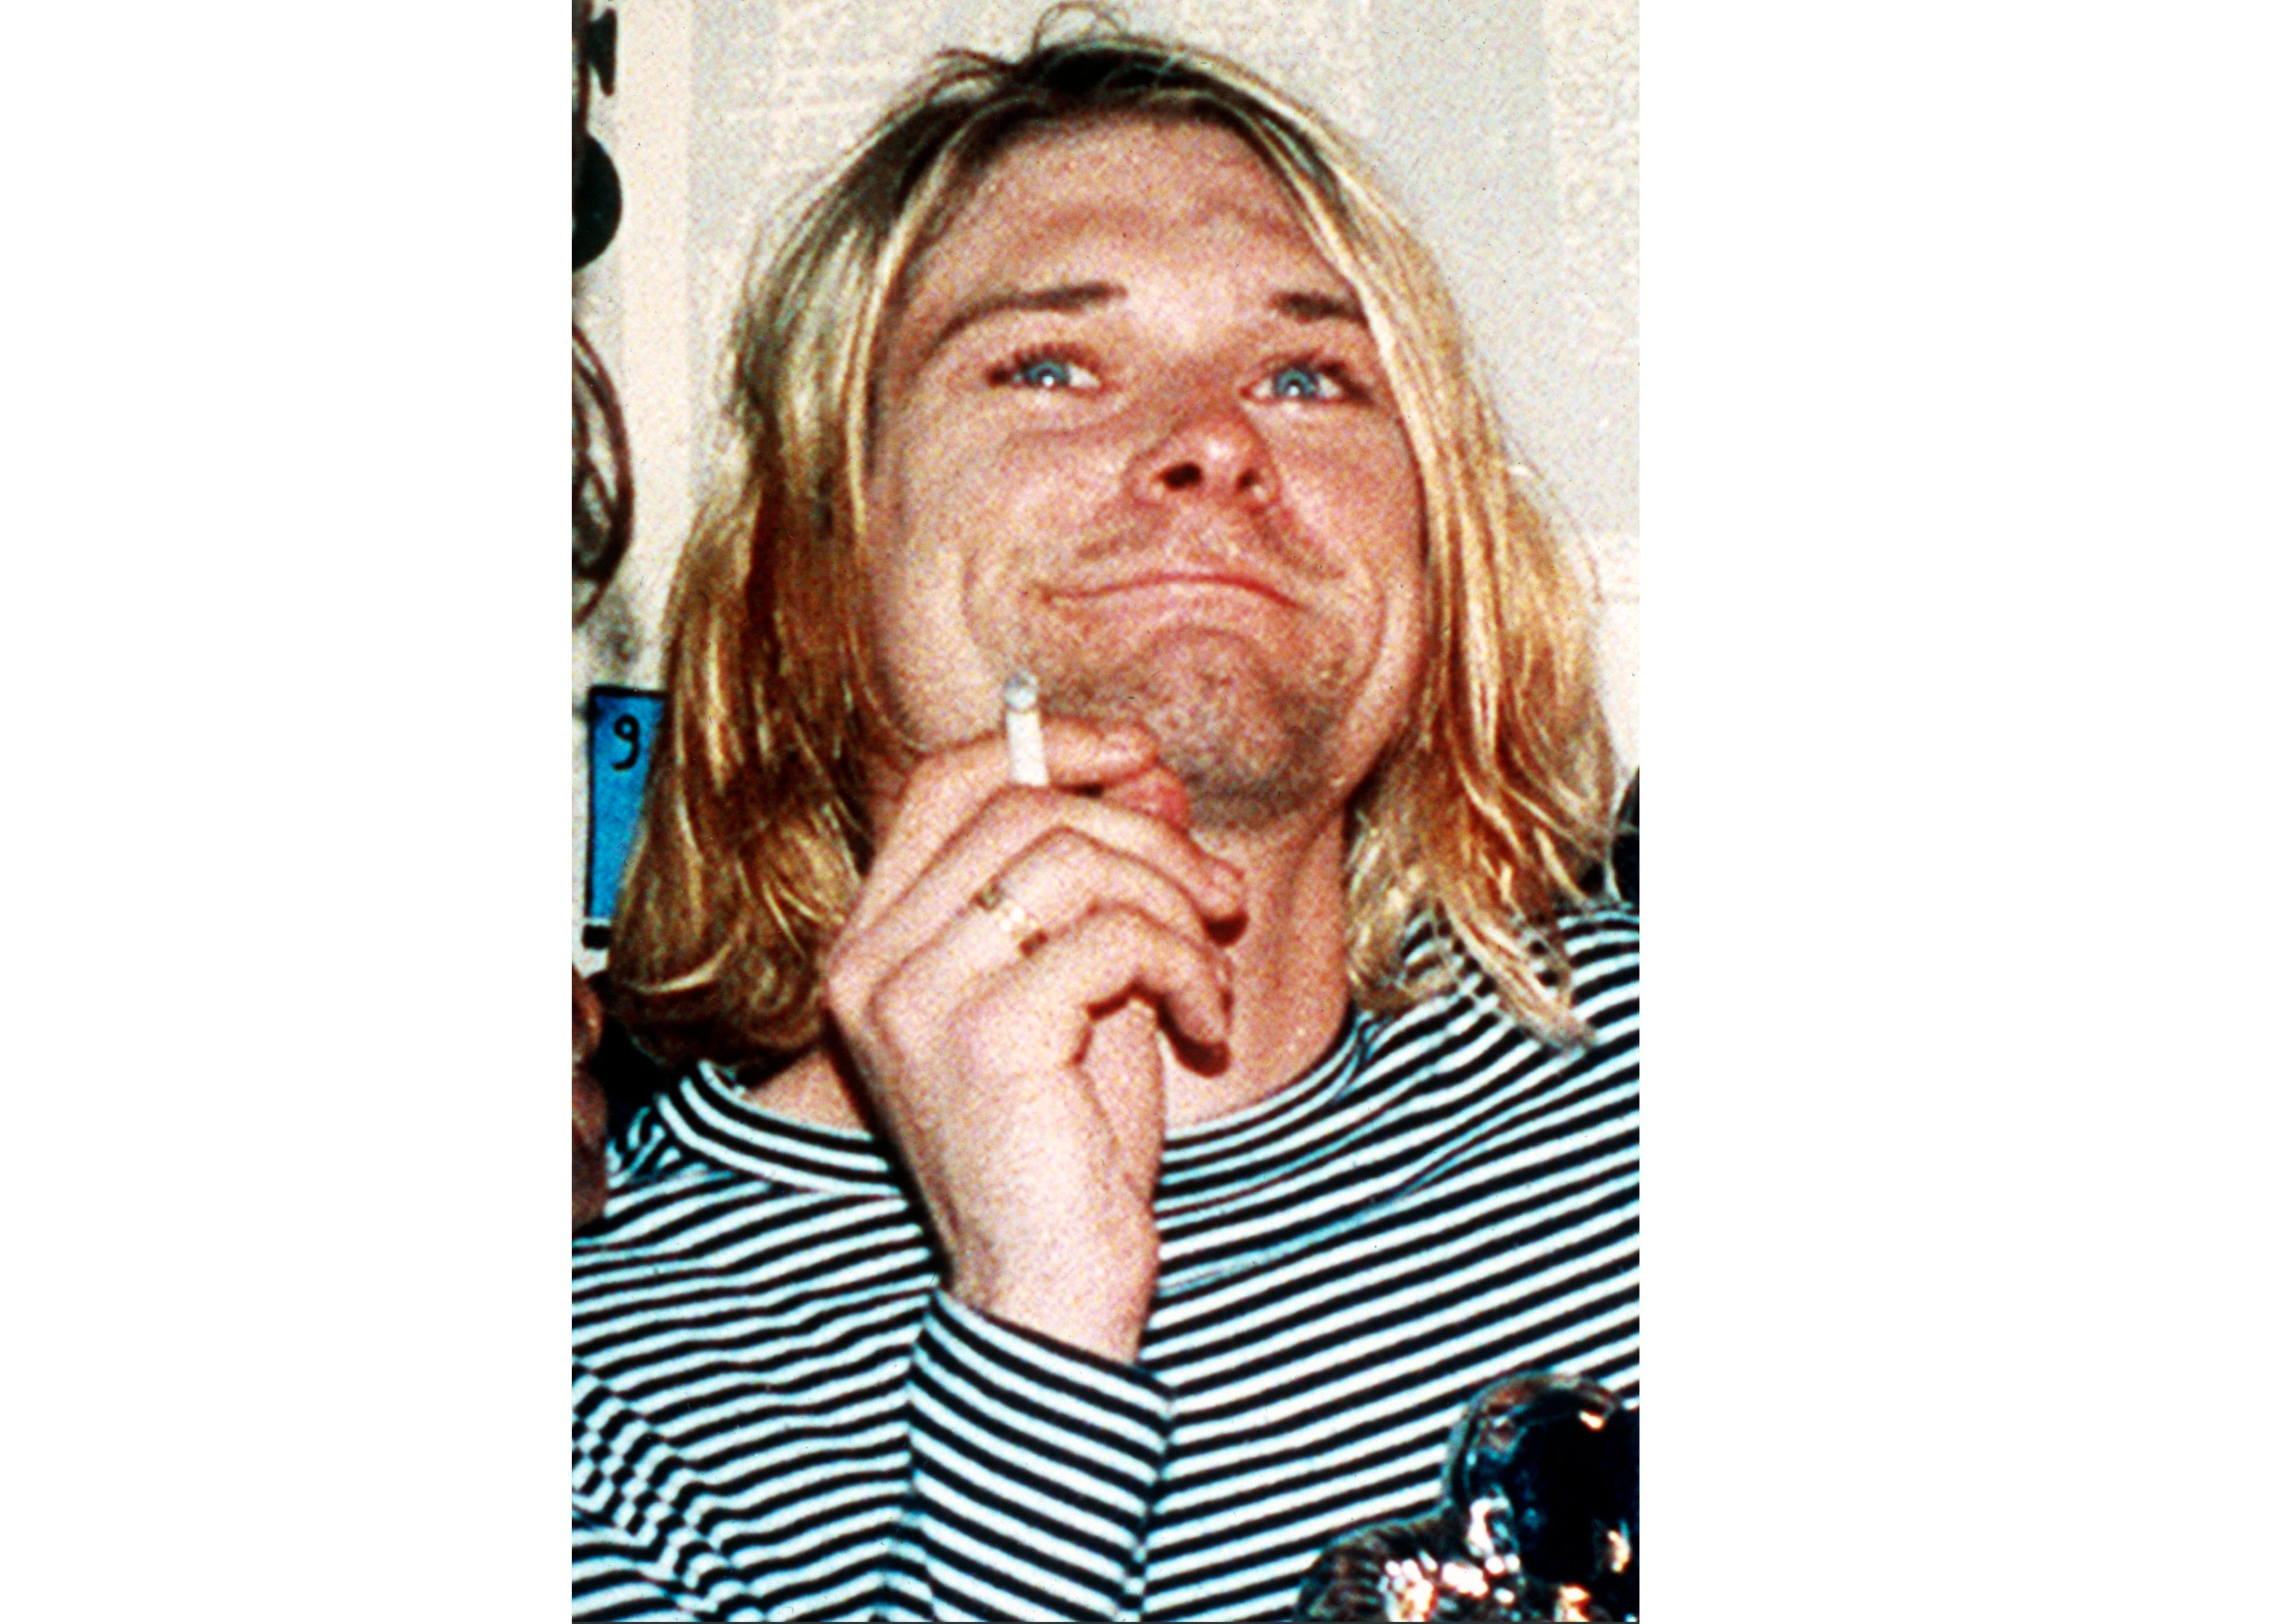 On 8 April 1994, Kurt Cobain was found dead at his Seattle home